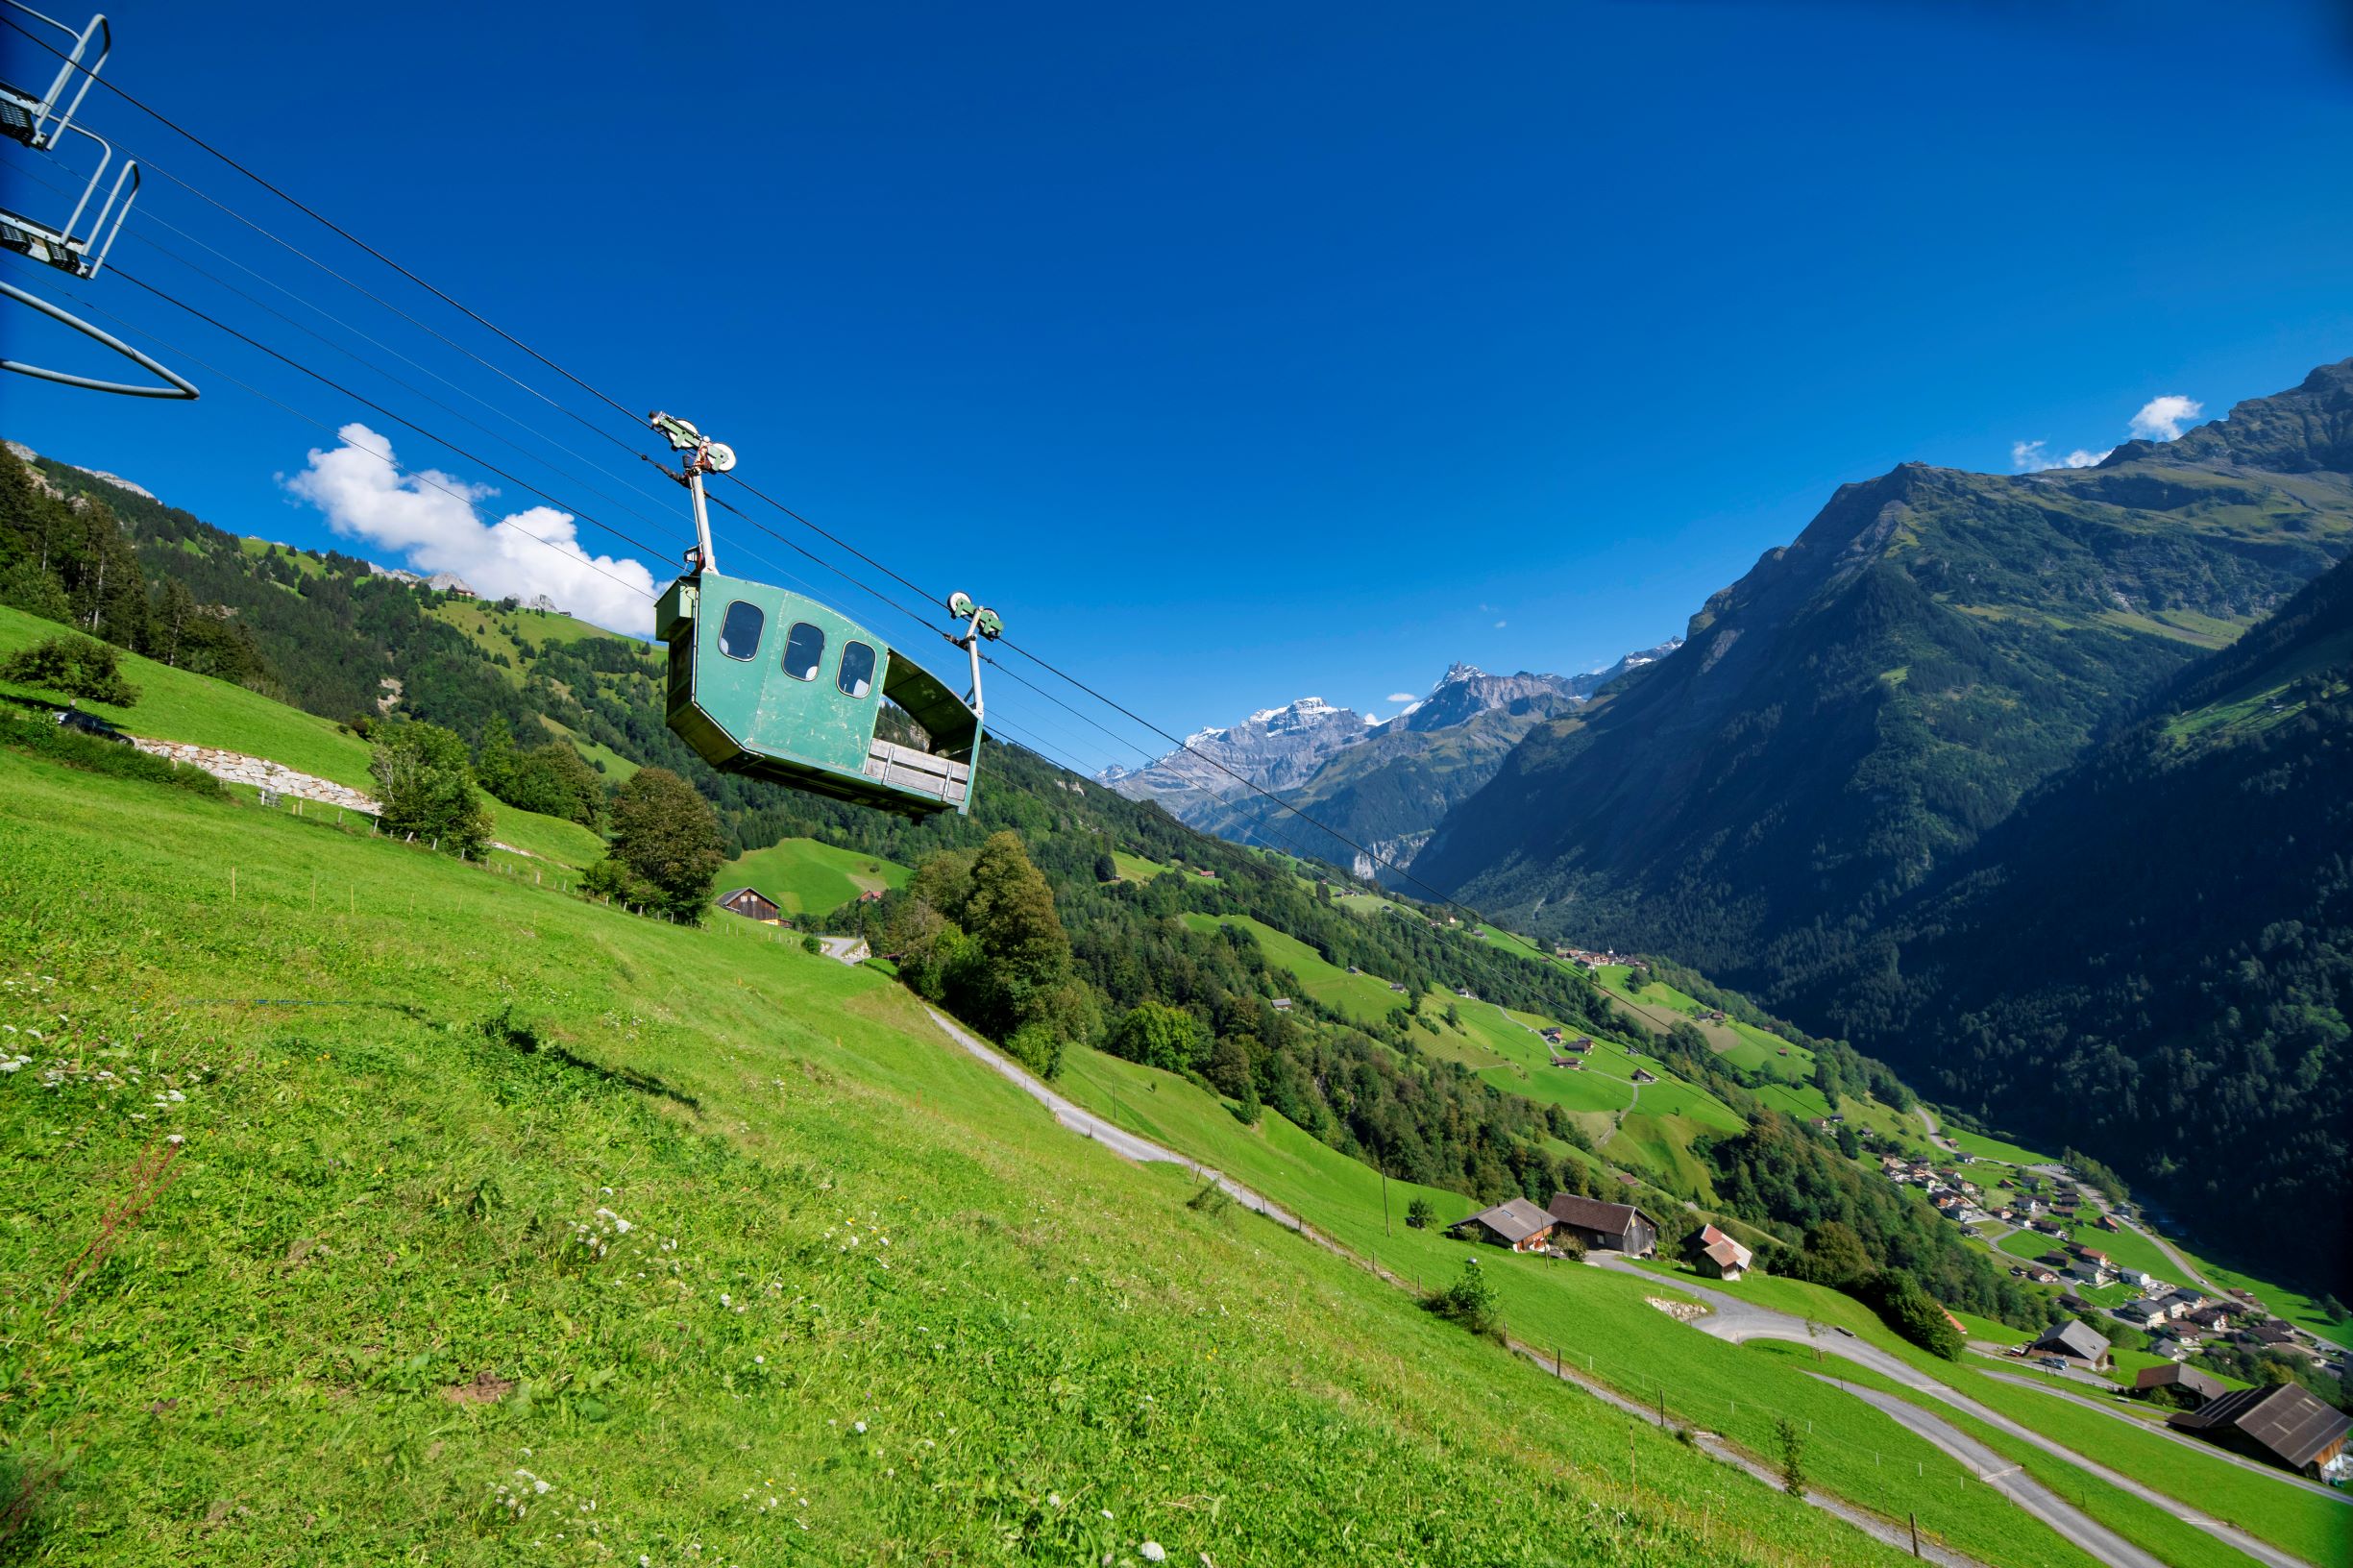 Cable car suspended above steep slope